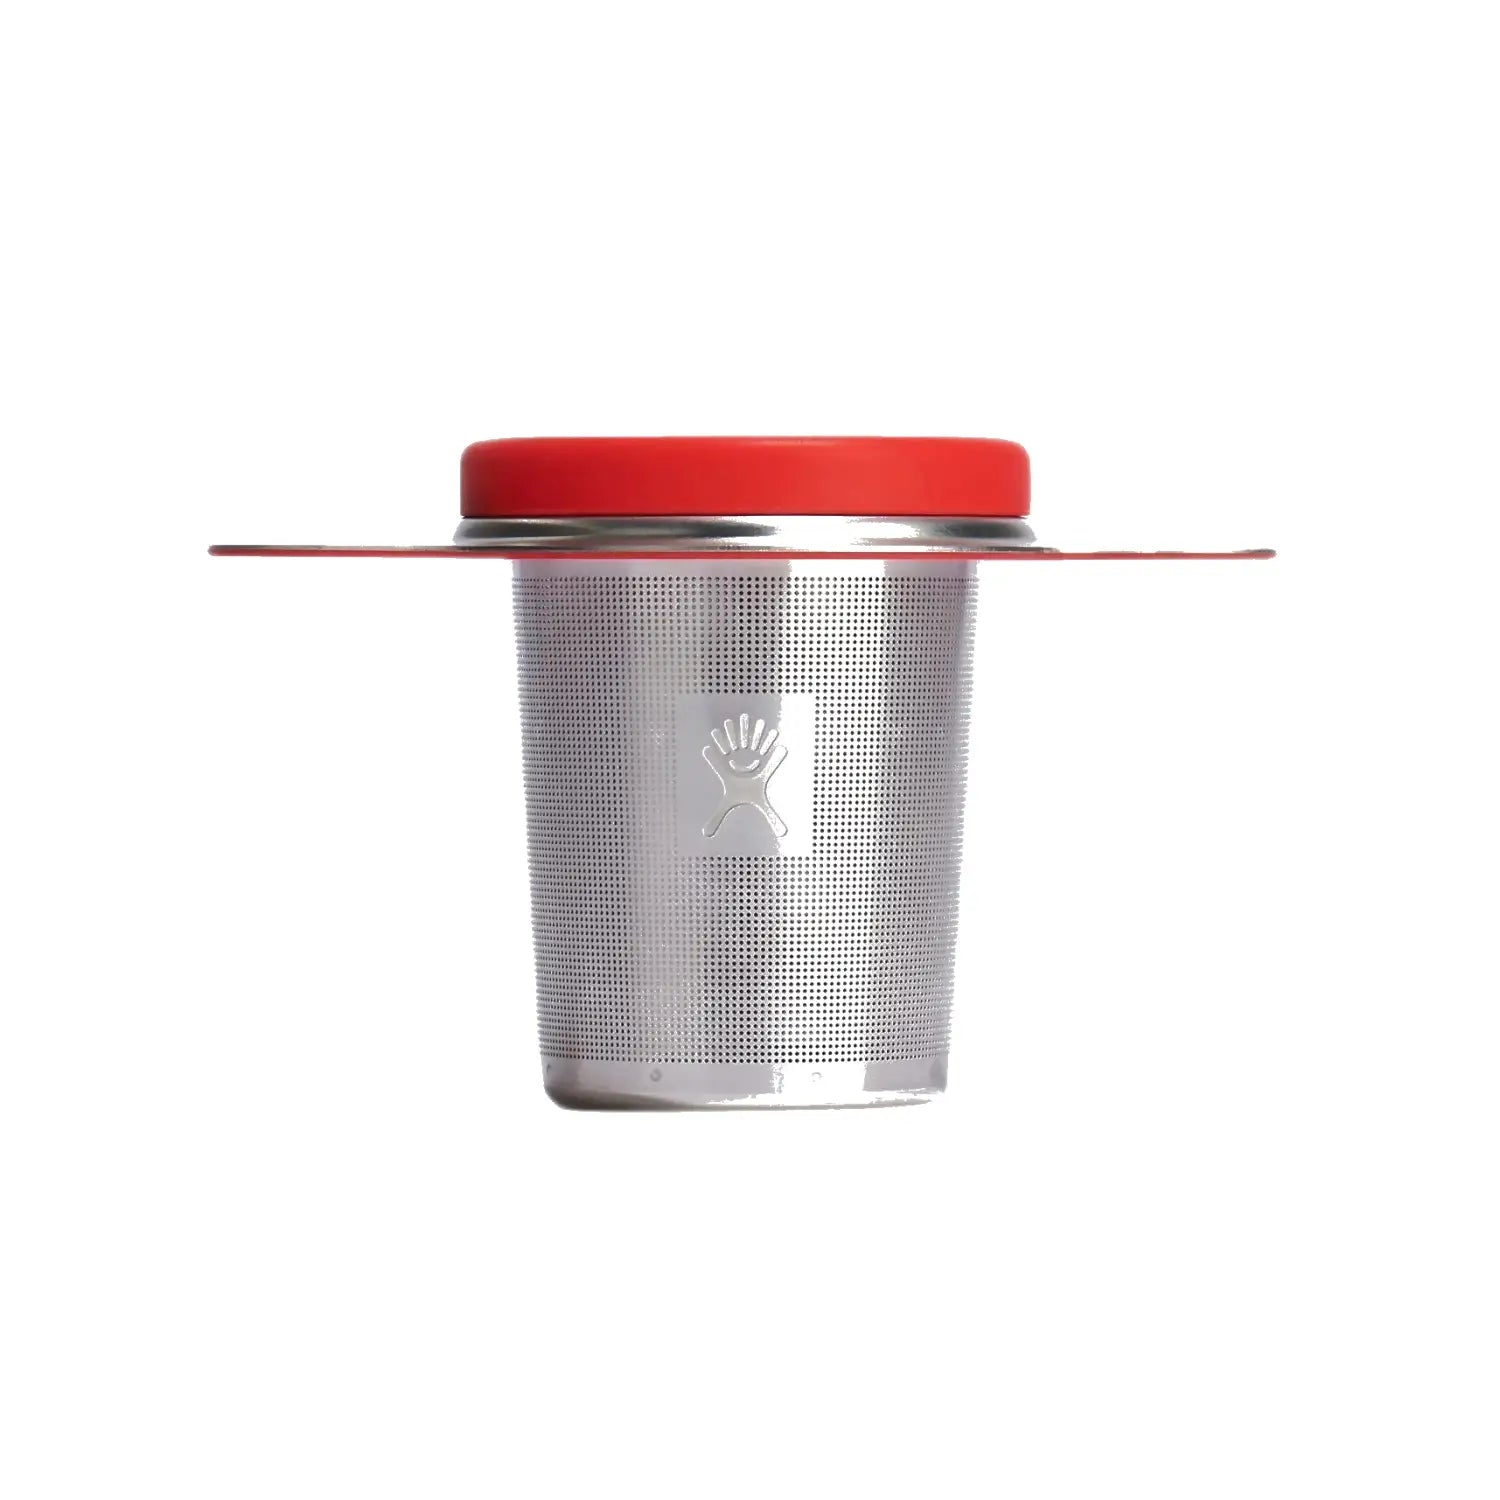 Hydro Flask Tea Infuser stainless steel with red cap - front view.